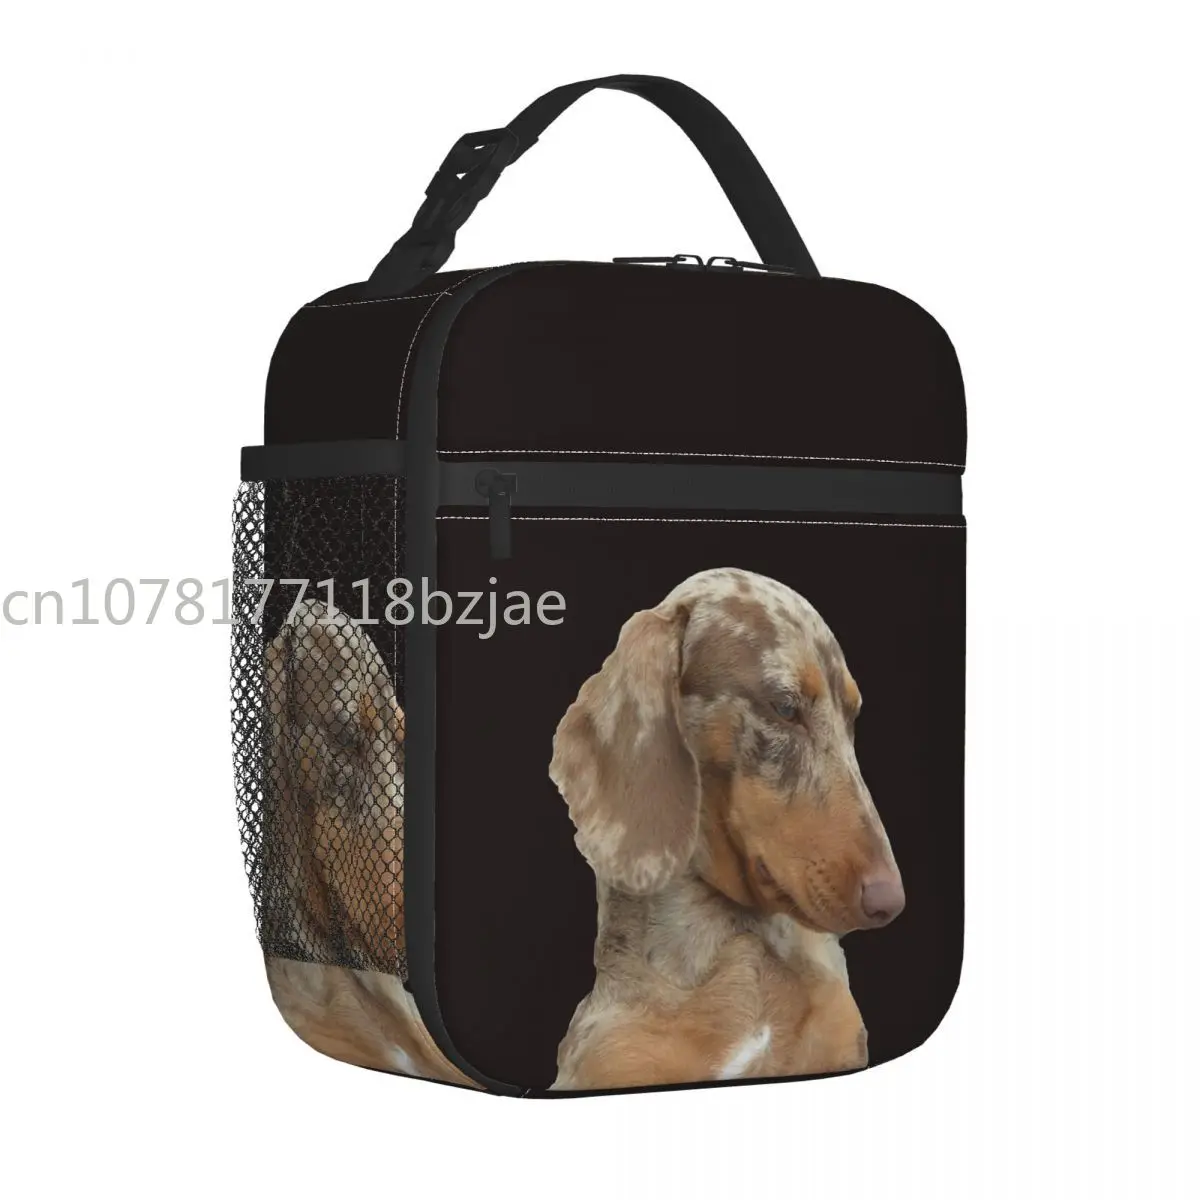 

Dachshund Insulated Lunch Bags Thermal Bag Meal Container Wiener Sausage Doxie Dog Lover Tote Lunch Box Food Storage Bag College